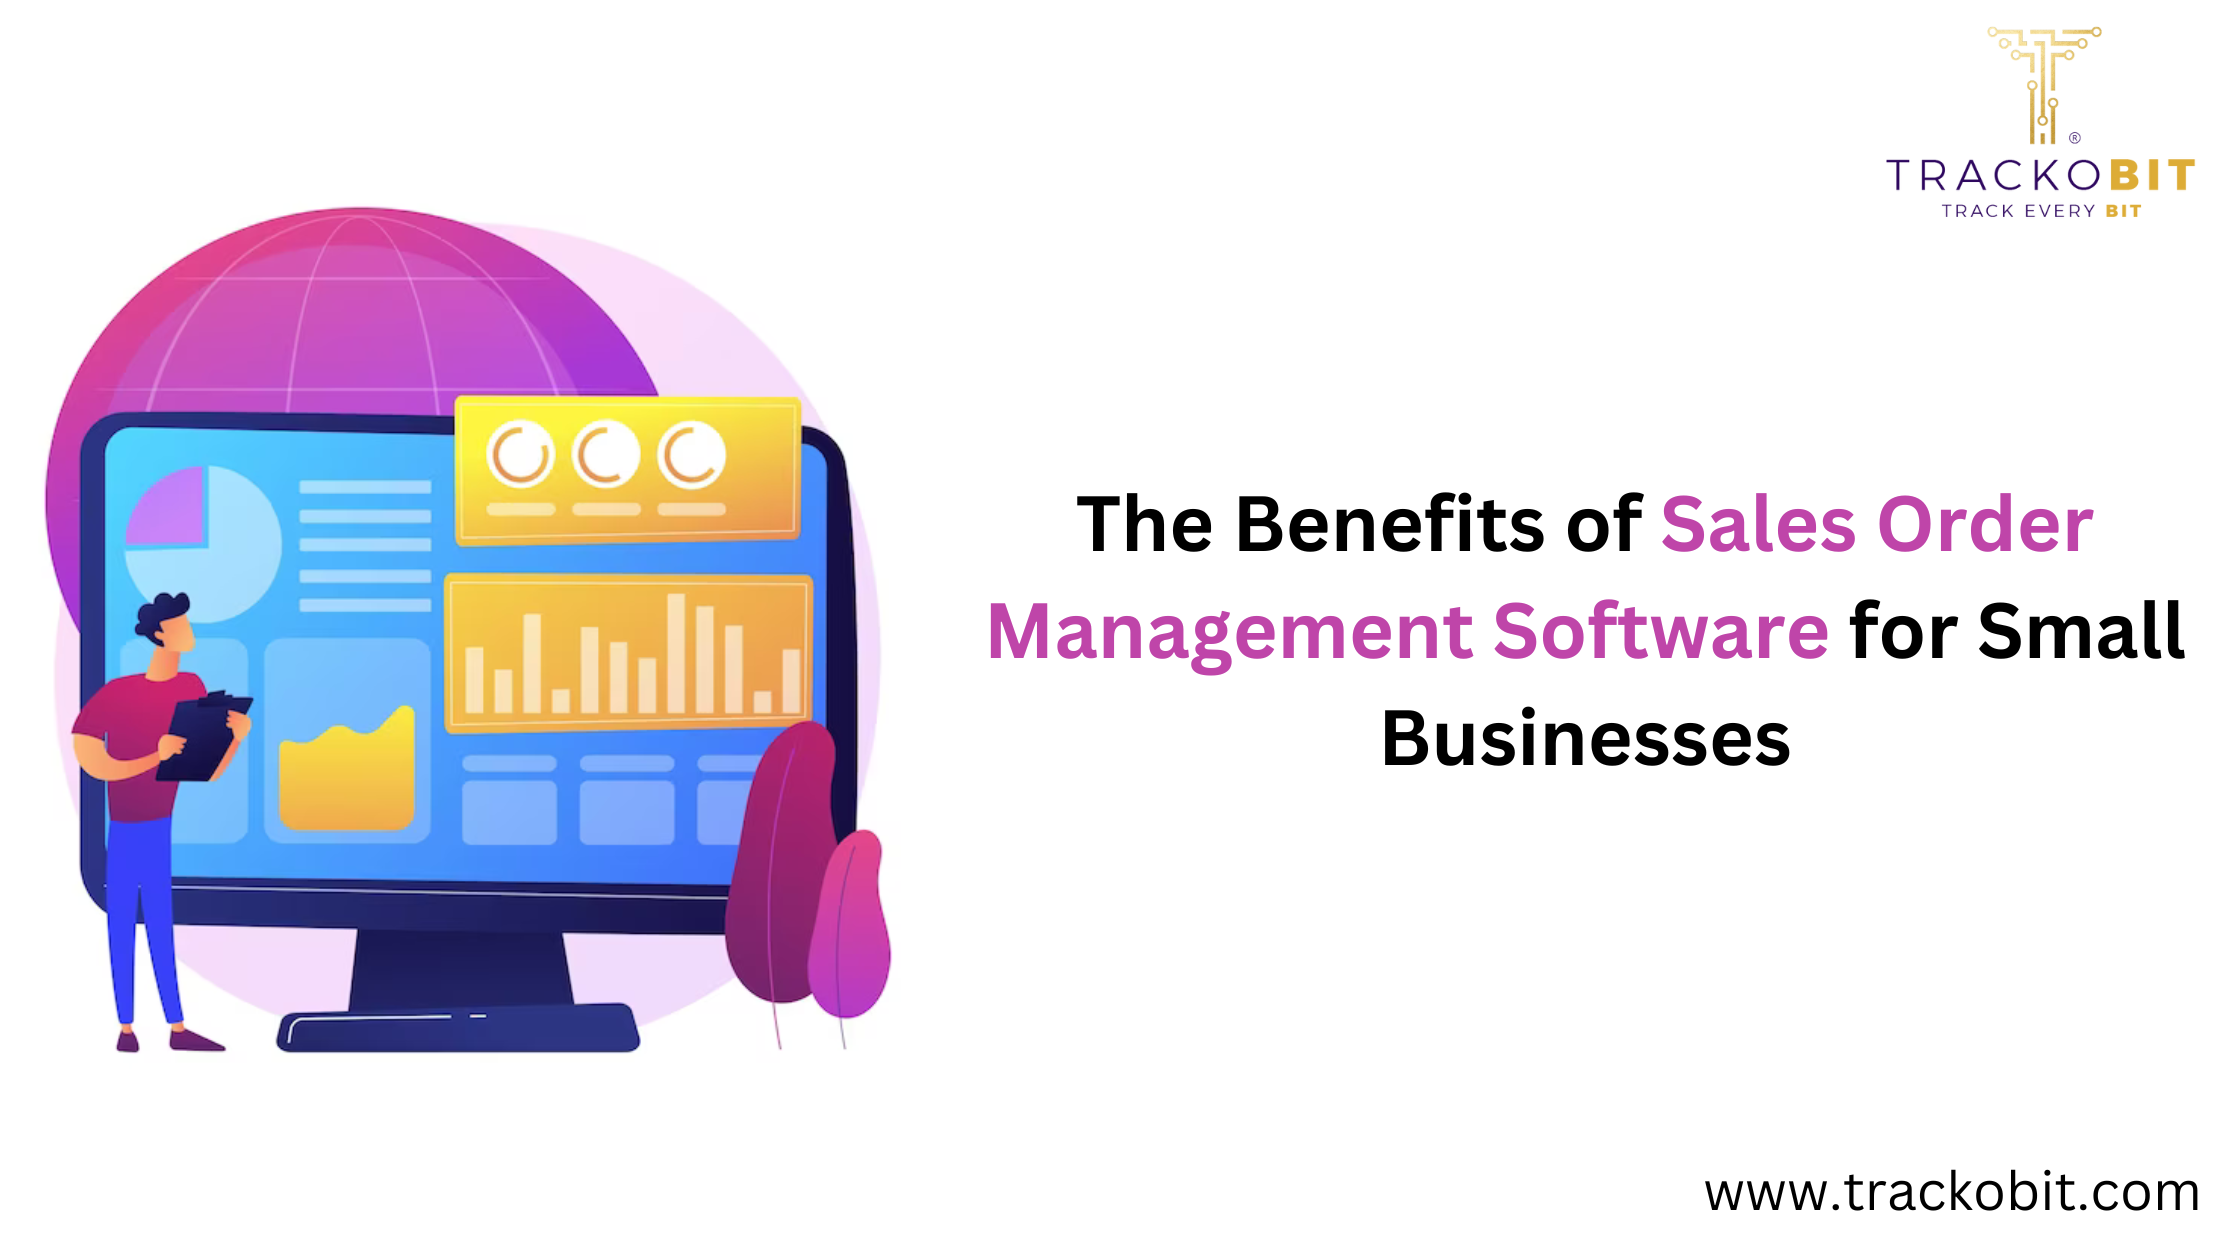 The Benefits of Sales Order Management Software for Small Businesses